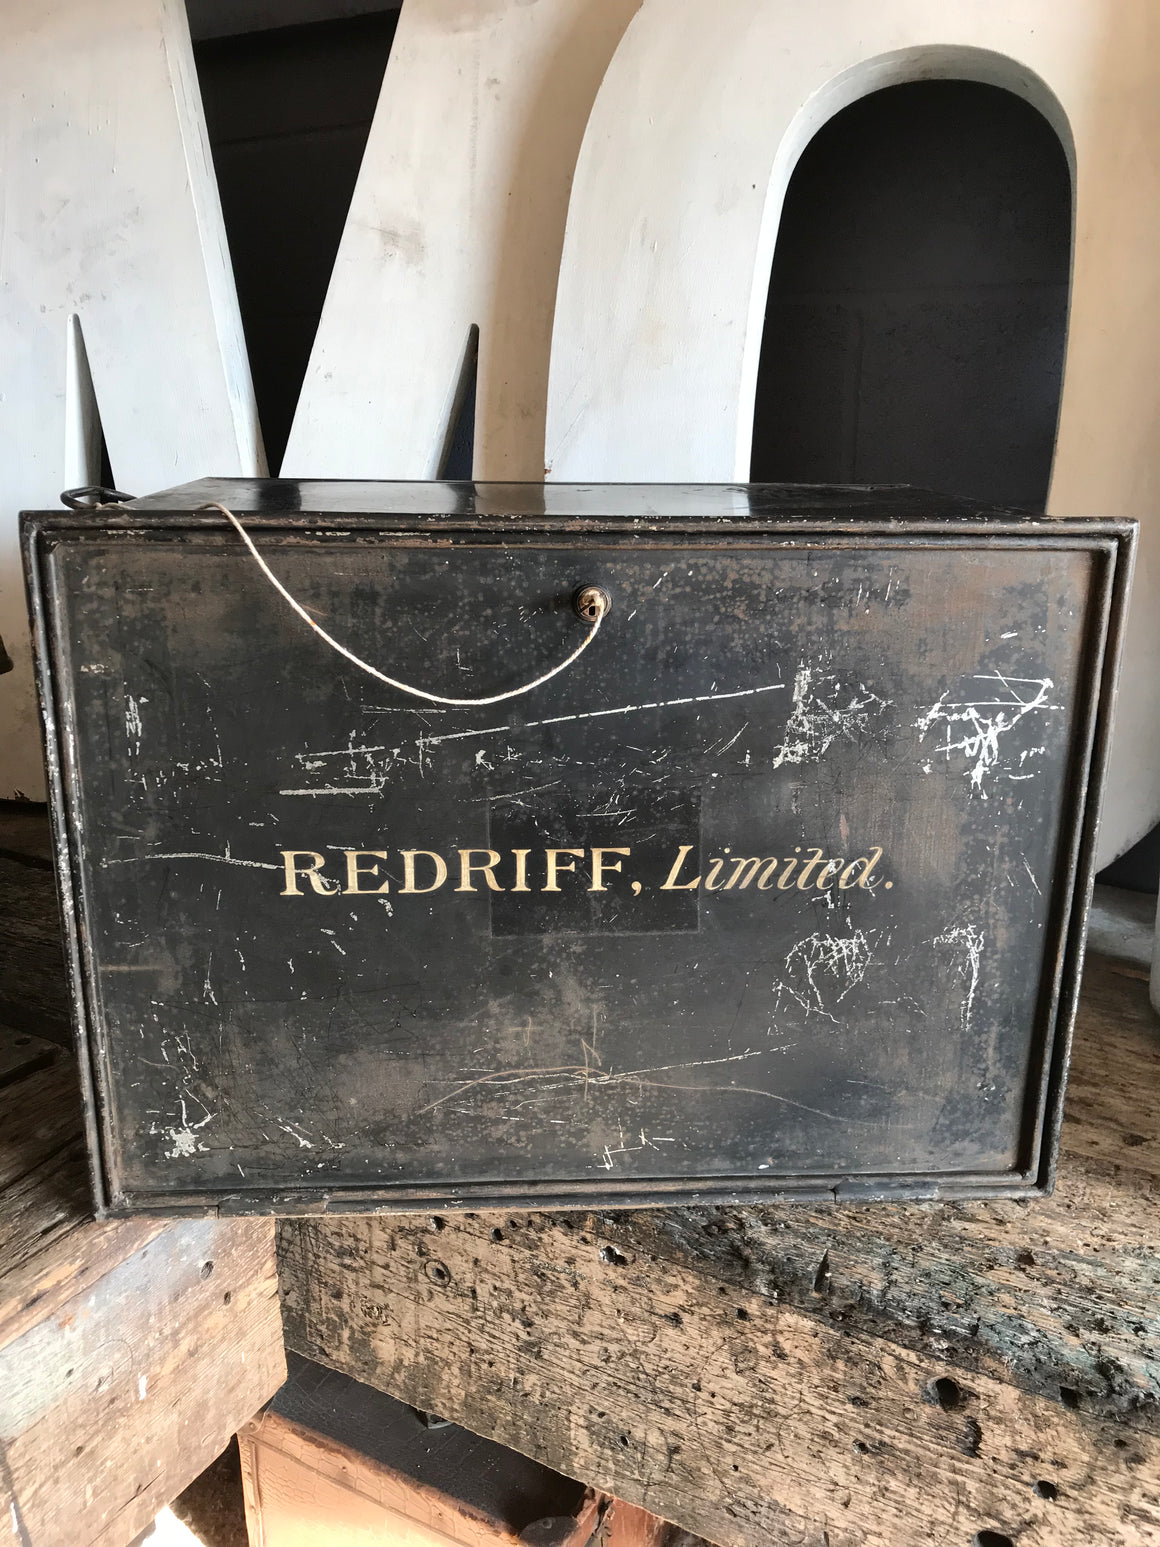 A 19th Century black metal Redriff Limited deed box with lock and key